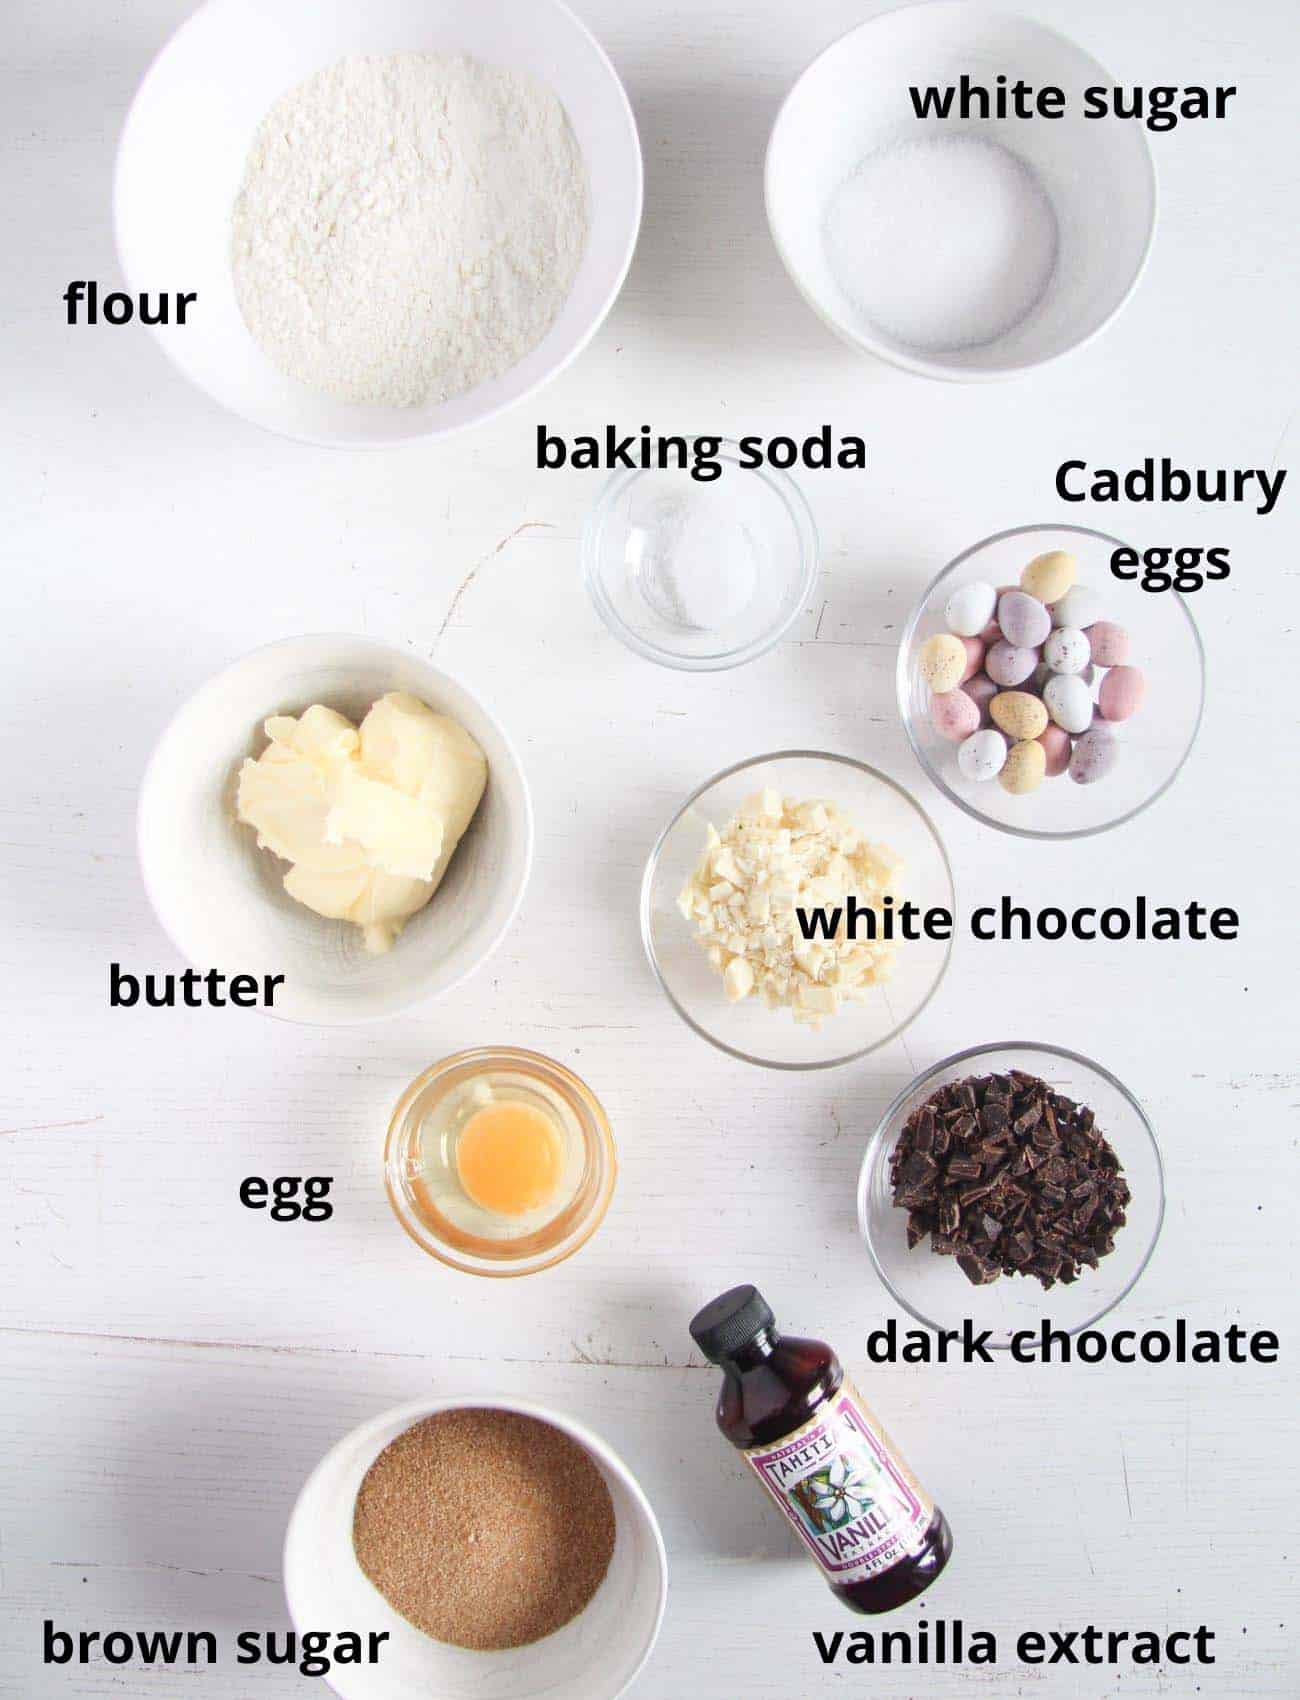 ingredients for making cookies on the table.